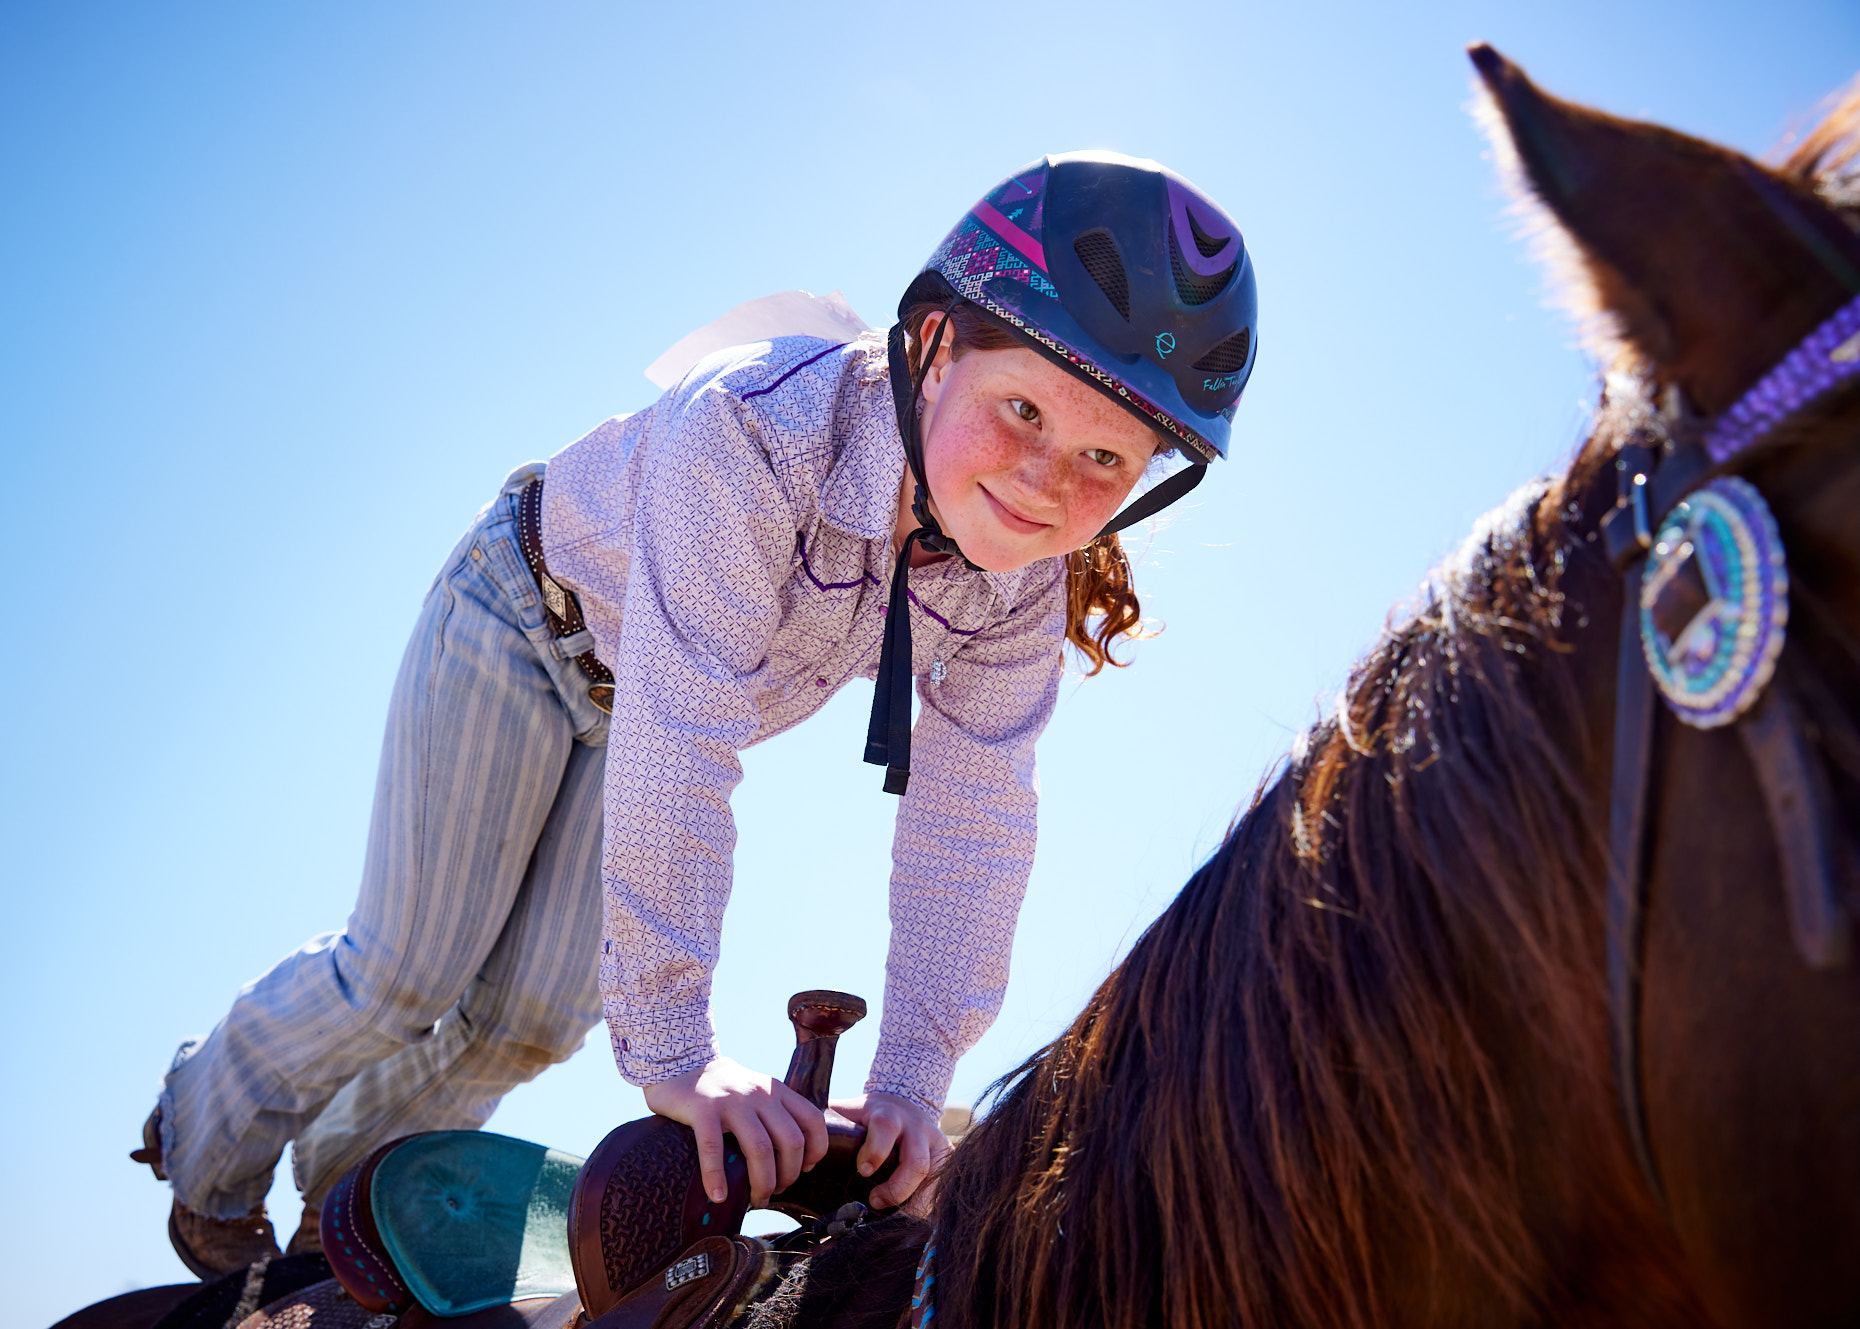 Young girl on her horse at rodeo | Childrens photography by Saverio Truglia